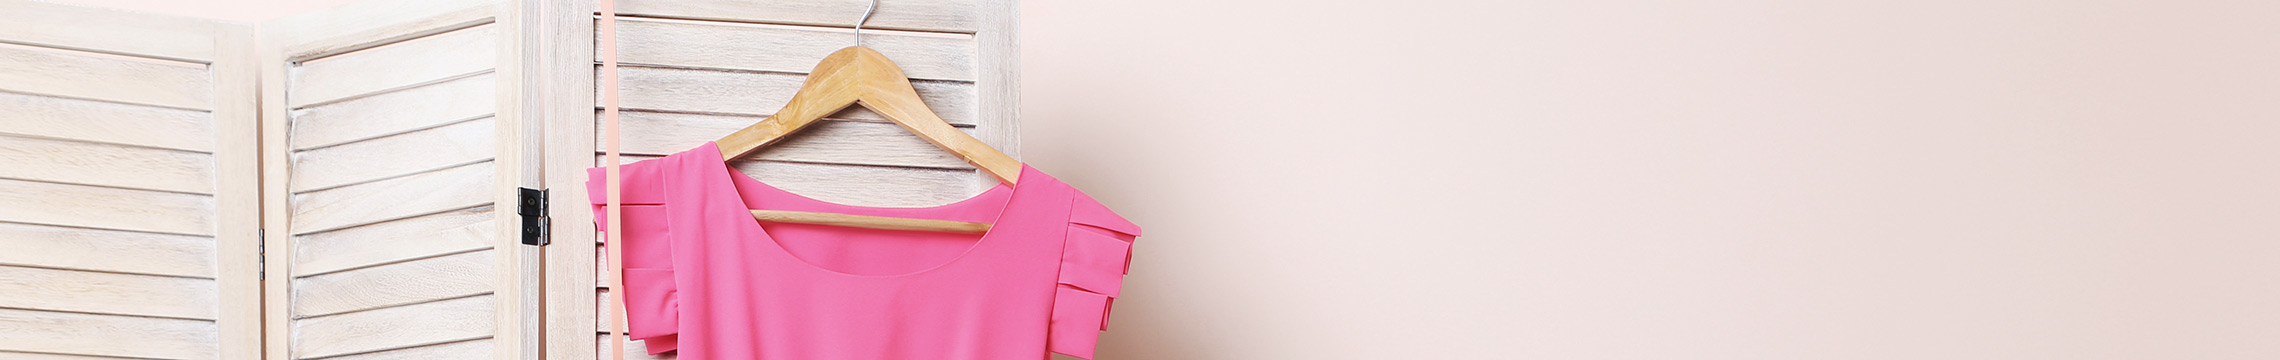 Pink dress hanging from a wooden hanger on a wood room divider